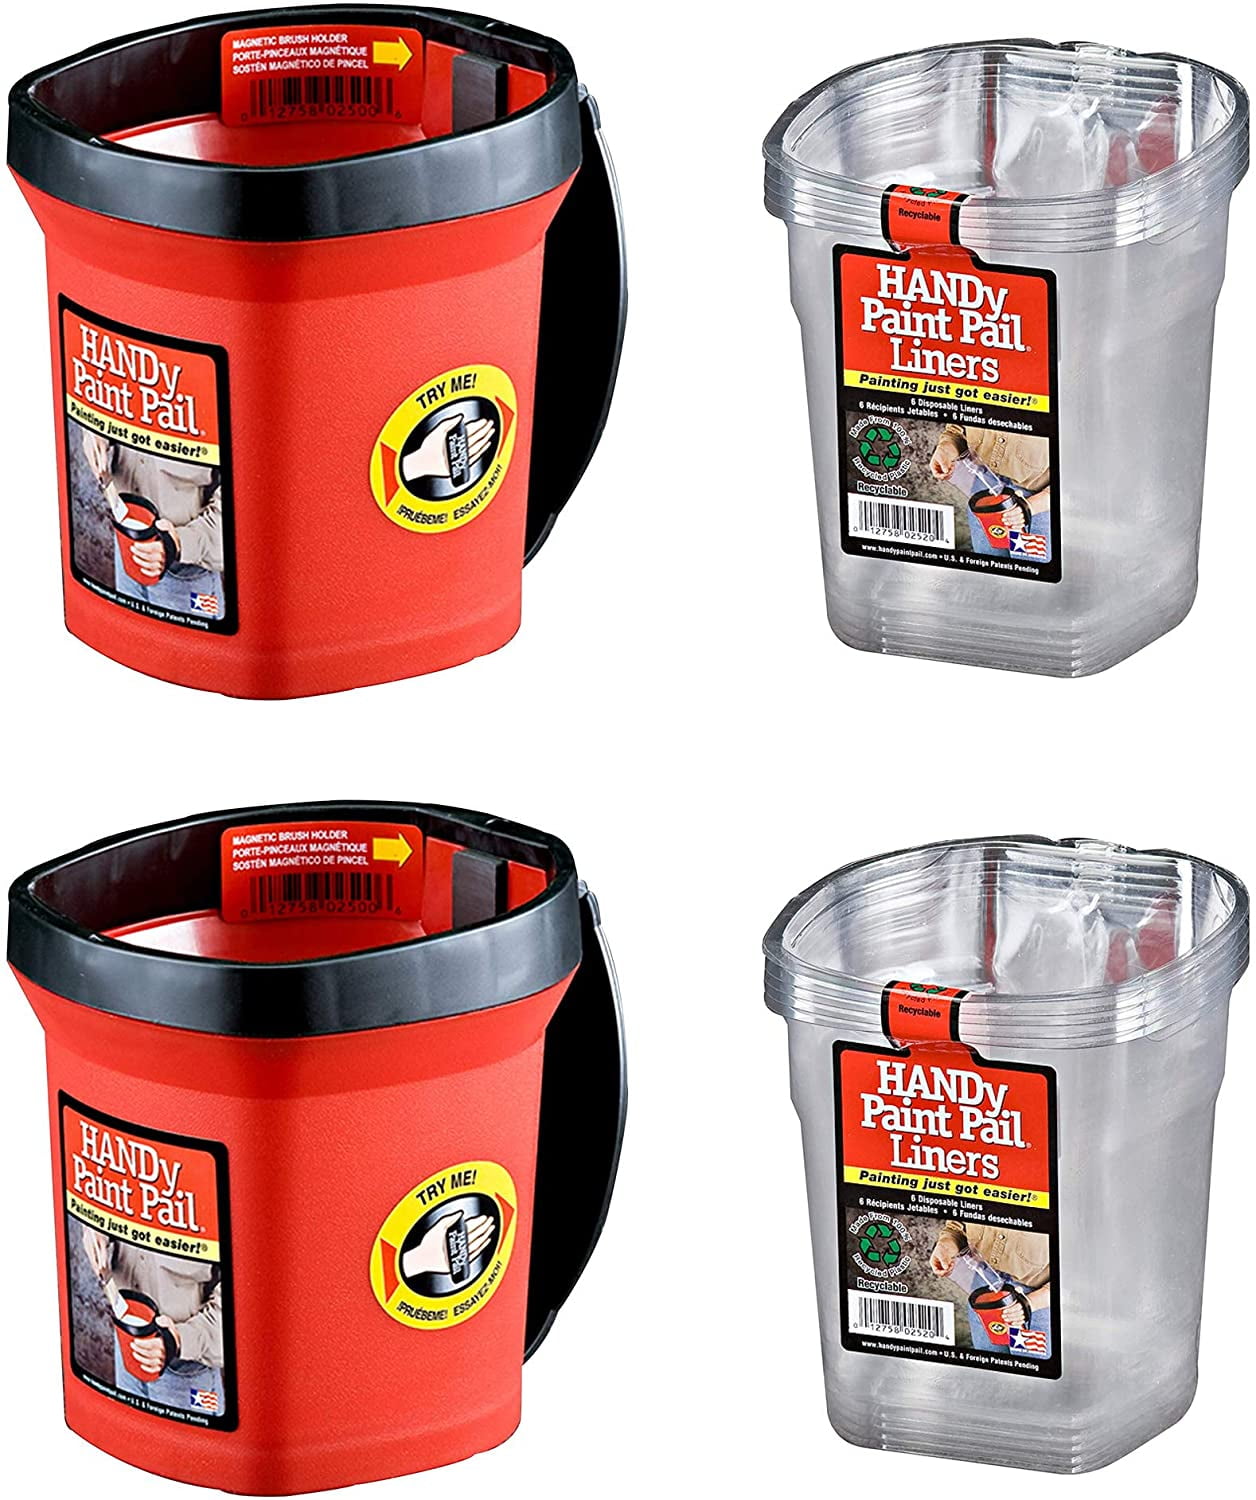 Update Version 6-Count Handy Paint Pail Liners Clear 